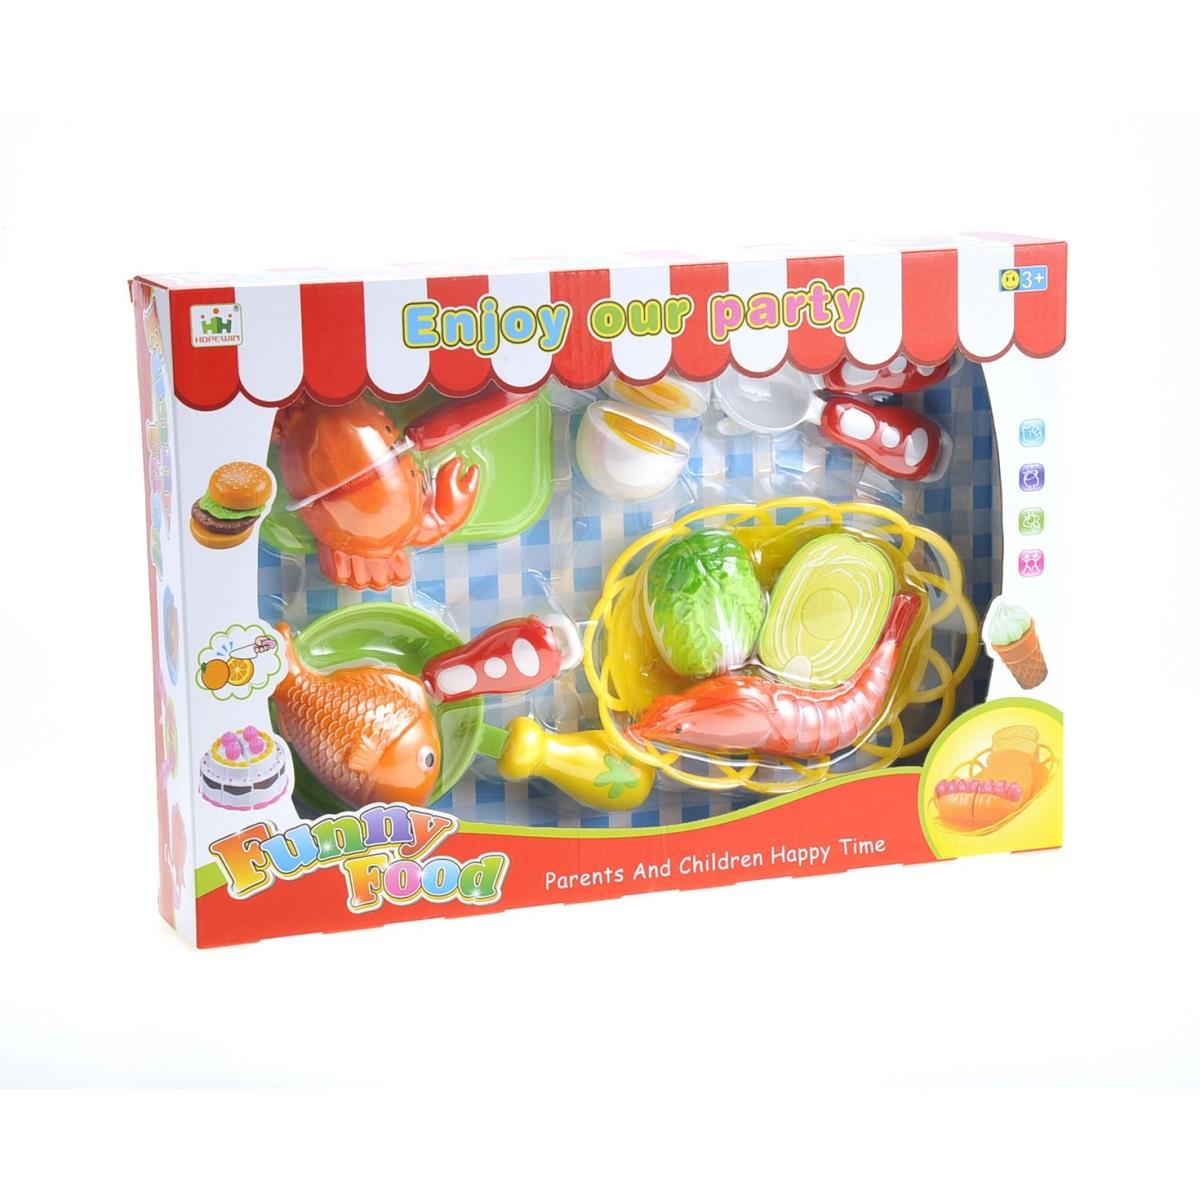 Psb18 Kitchen Fun Seafood Hot Pot Dinner Cutting Food Play Set For Kids With Egg & Vegetable